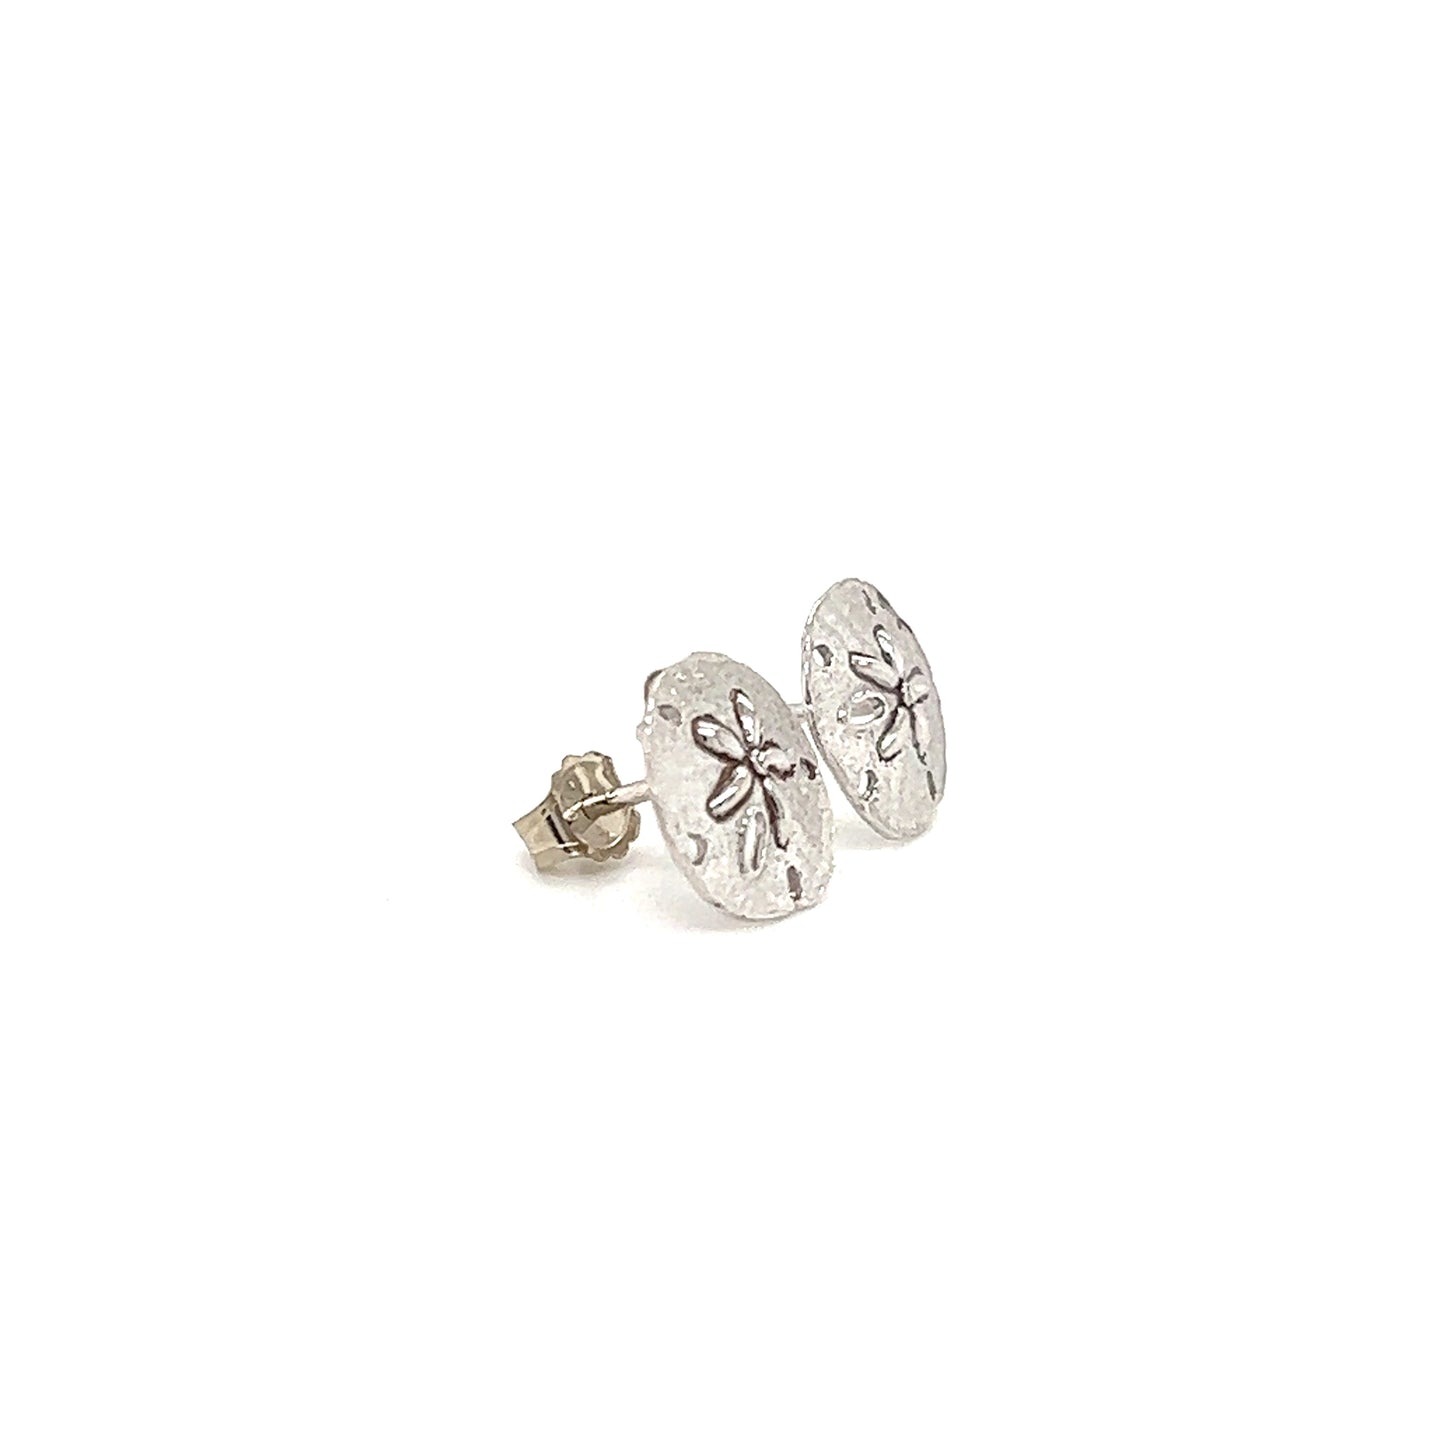 Sand Dollar Stud Earrings in 14K White Gold Right Side View